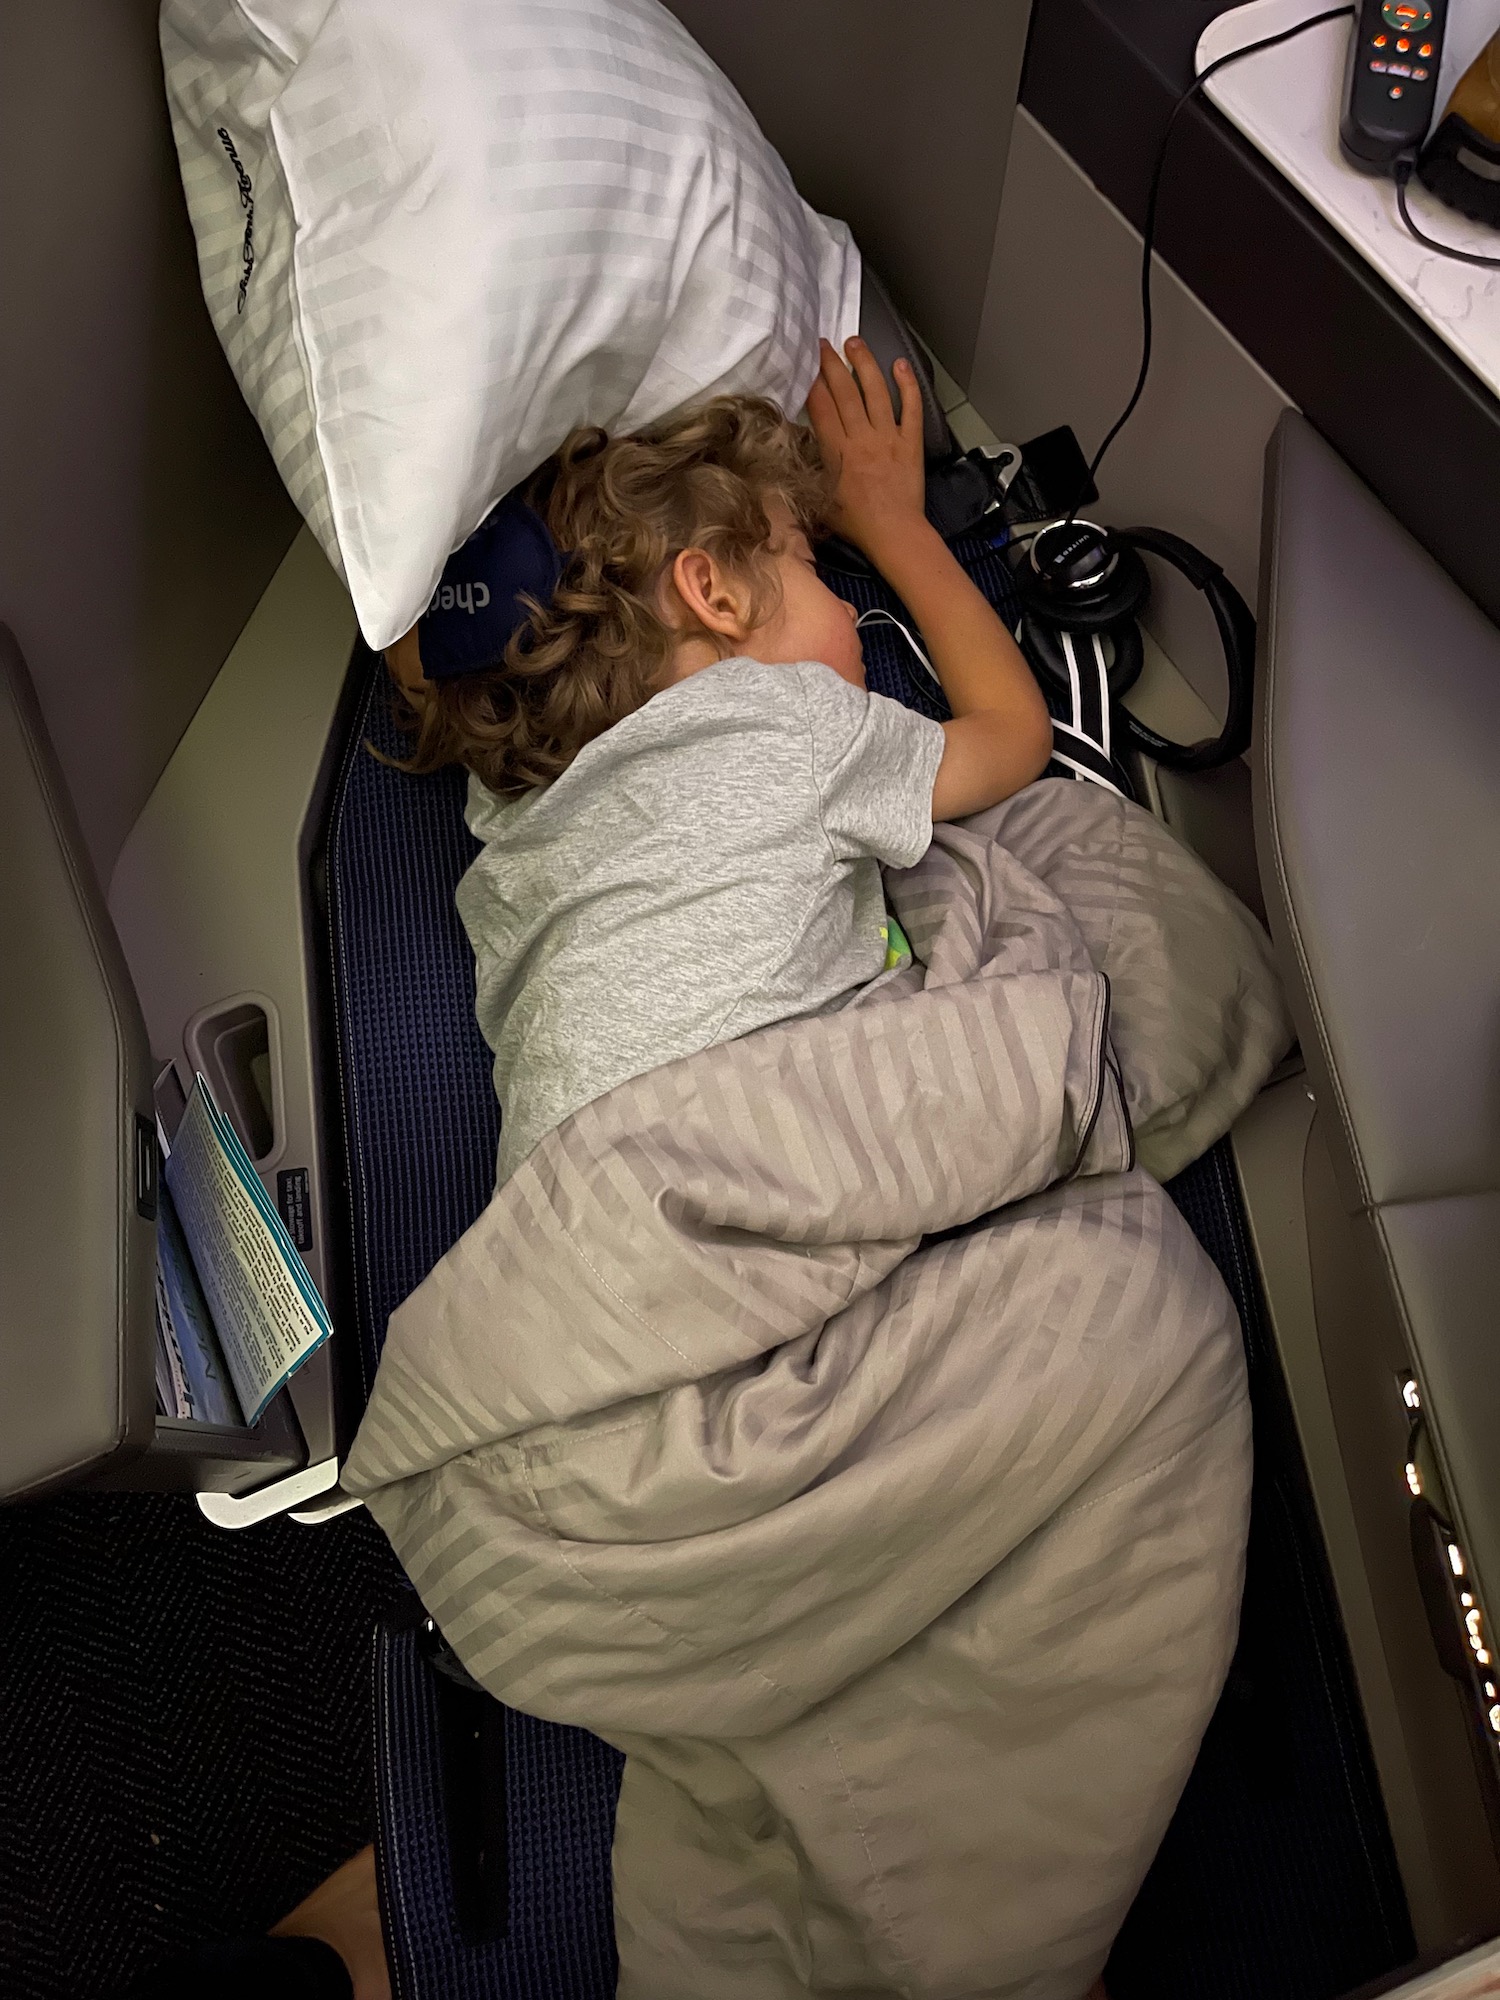 a child sleeping in a plane